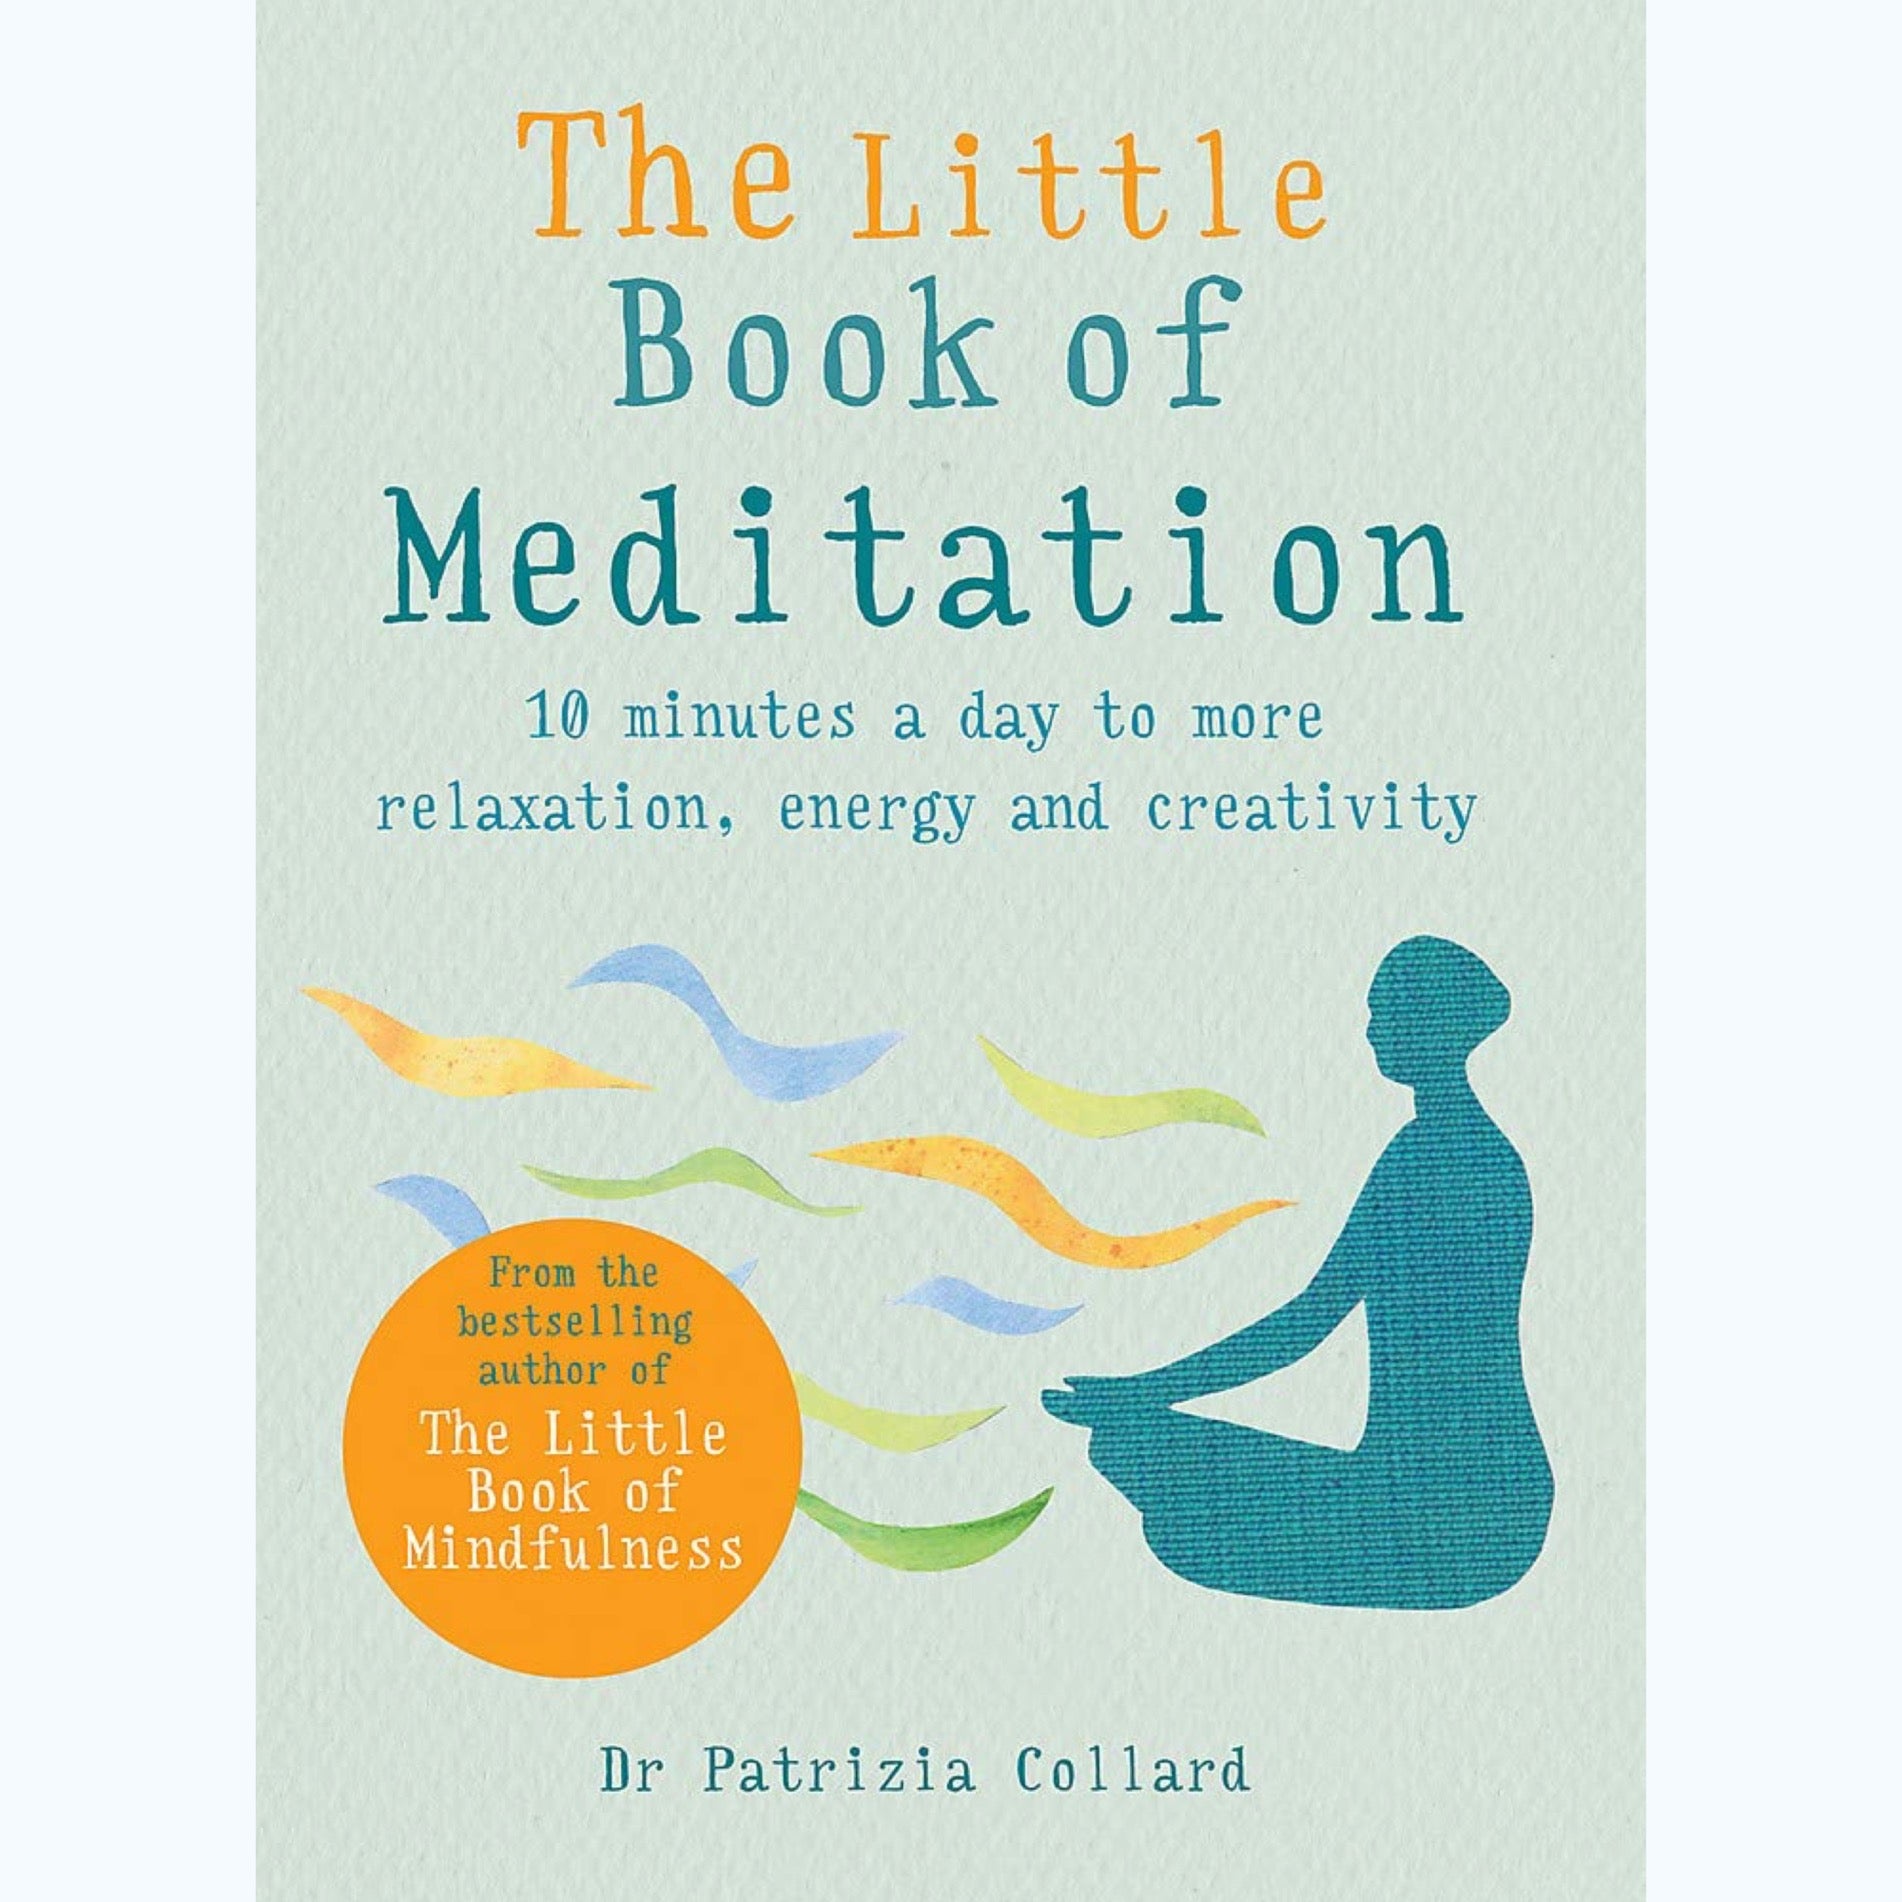 The front cover illustration of The Little Book of Meditation